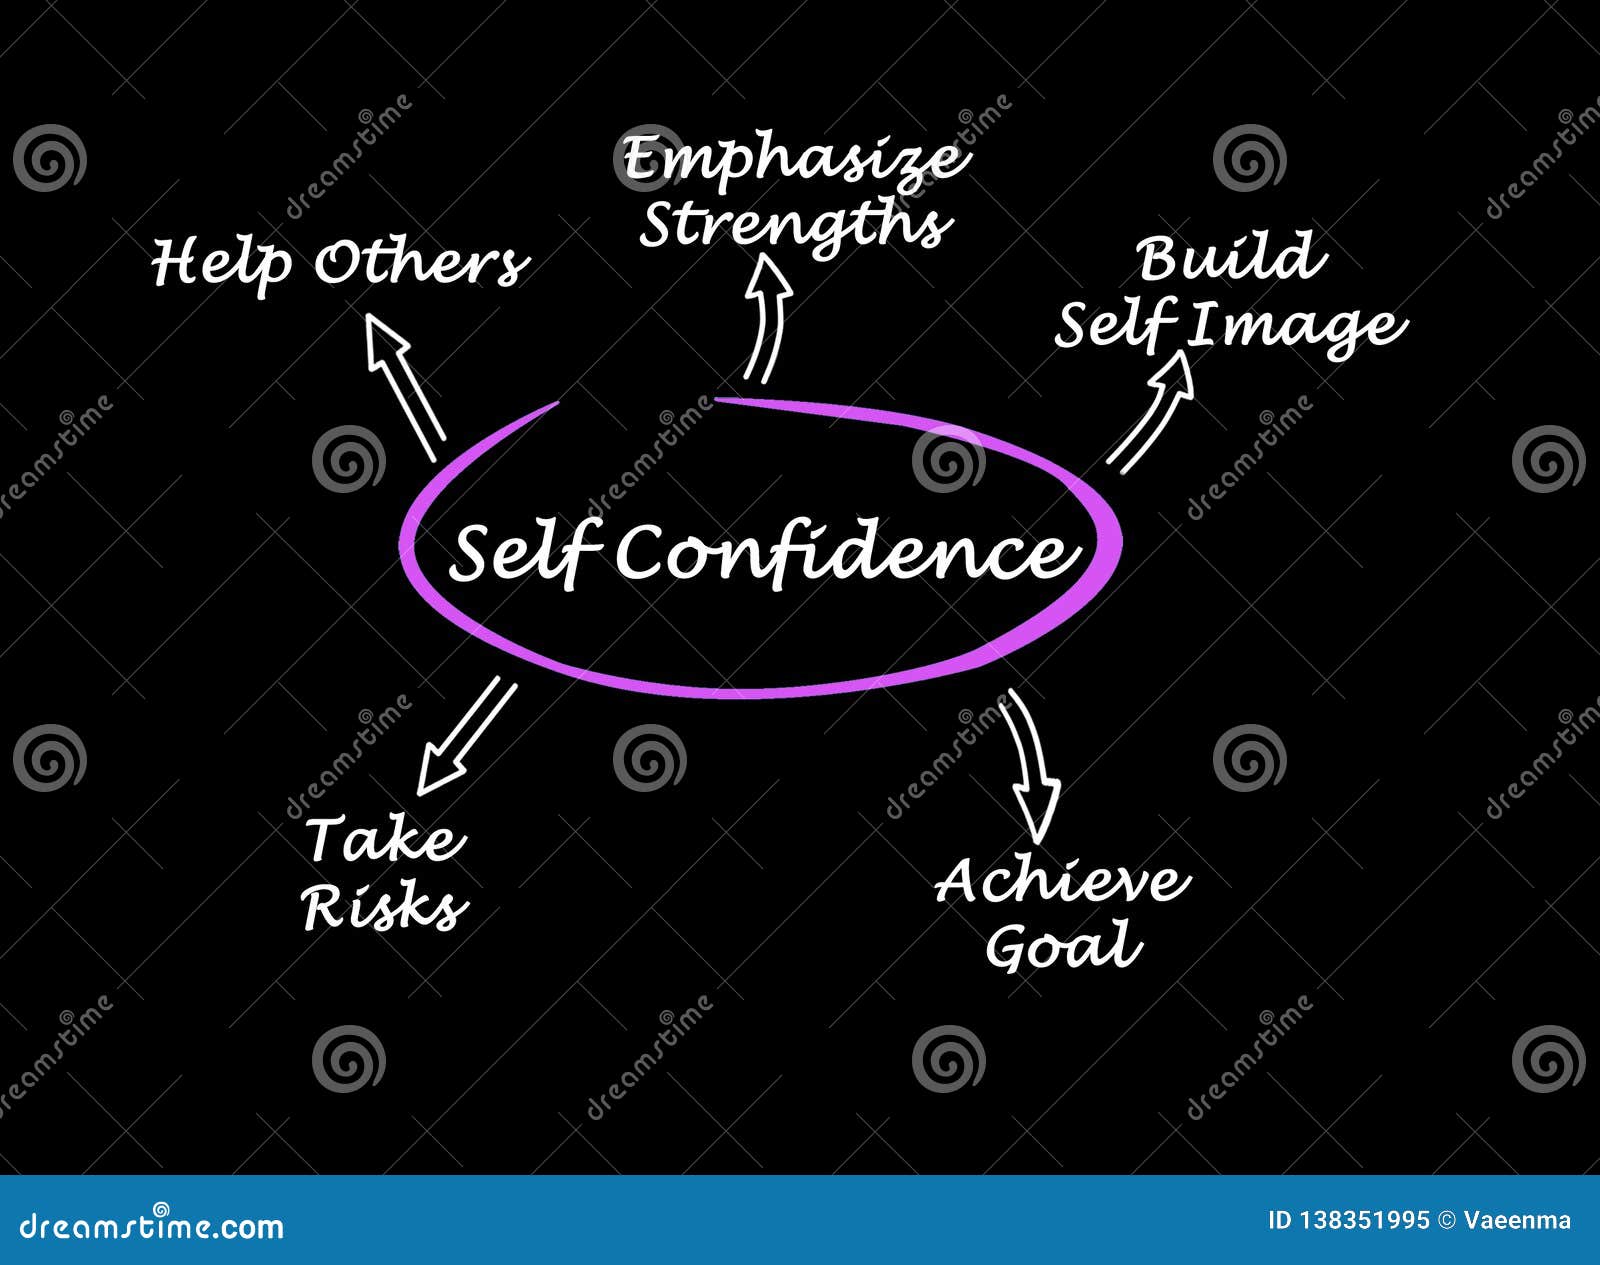 what lead to self-confidence